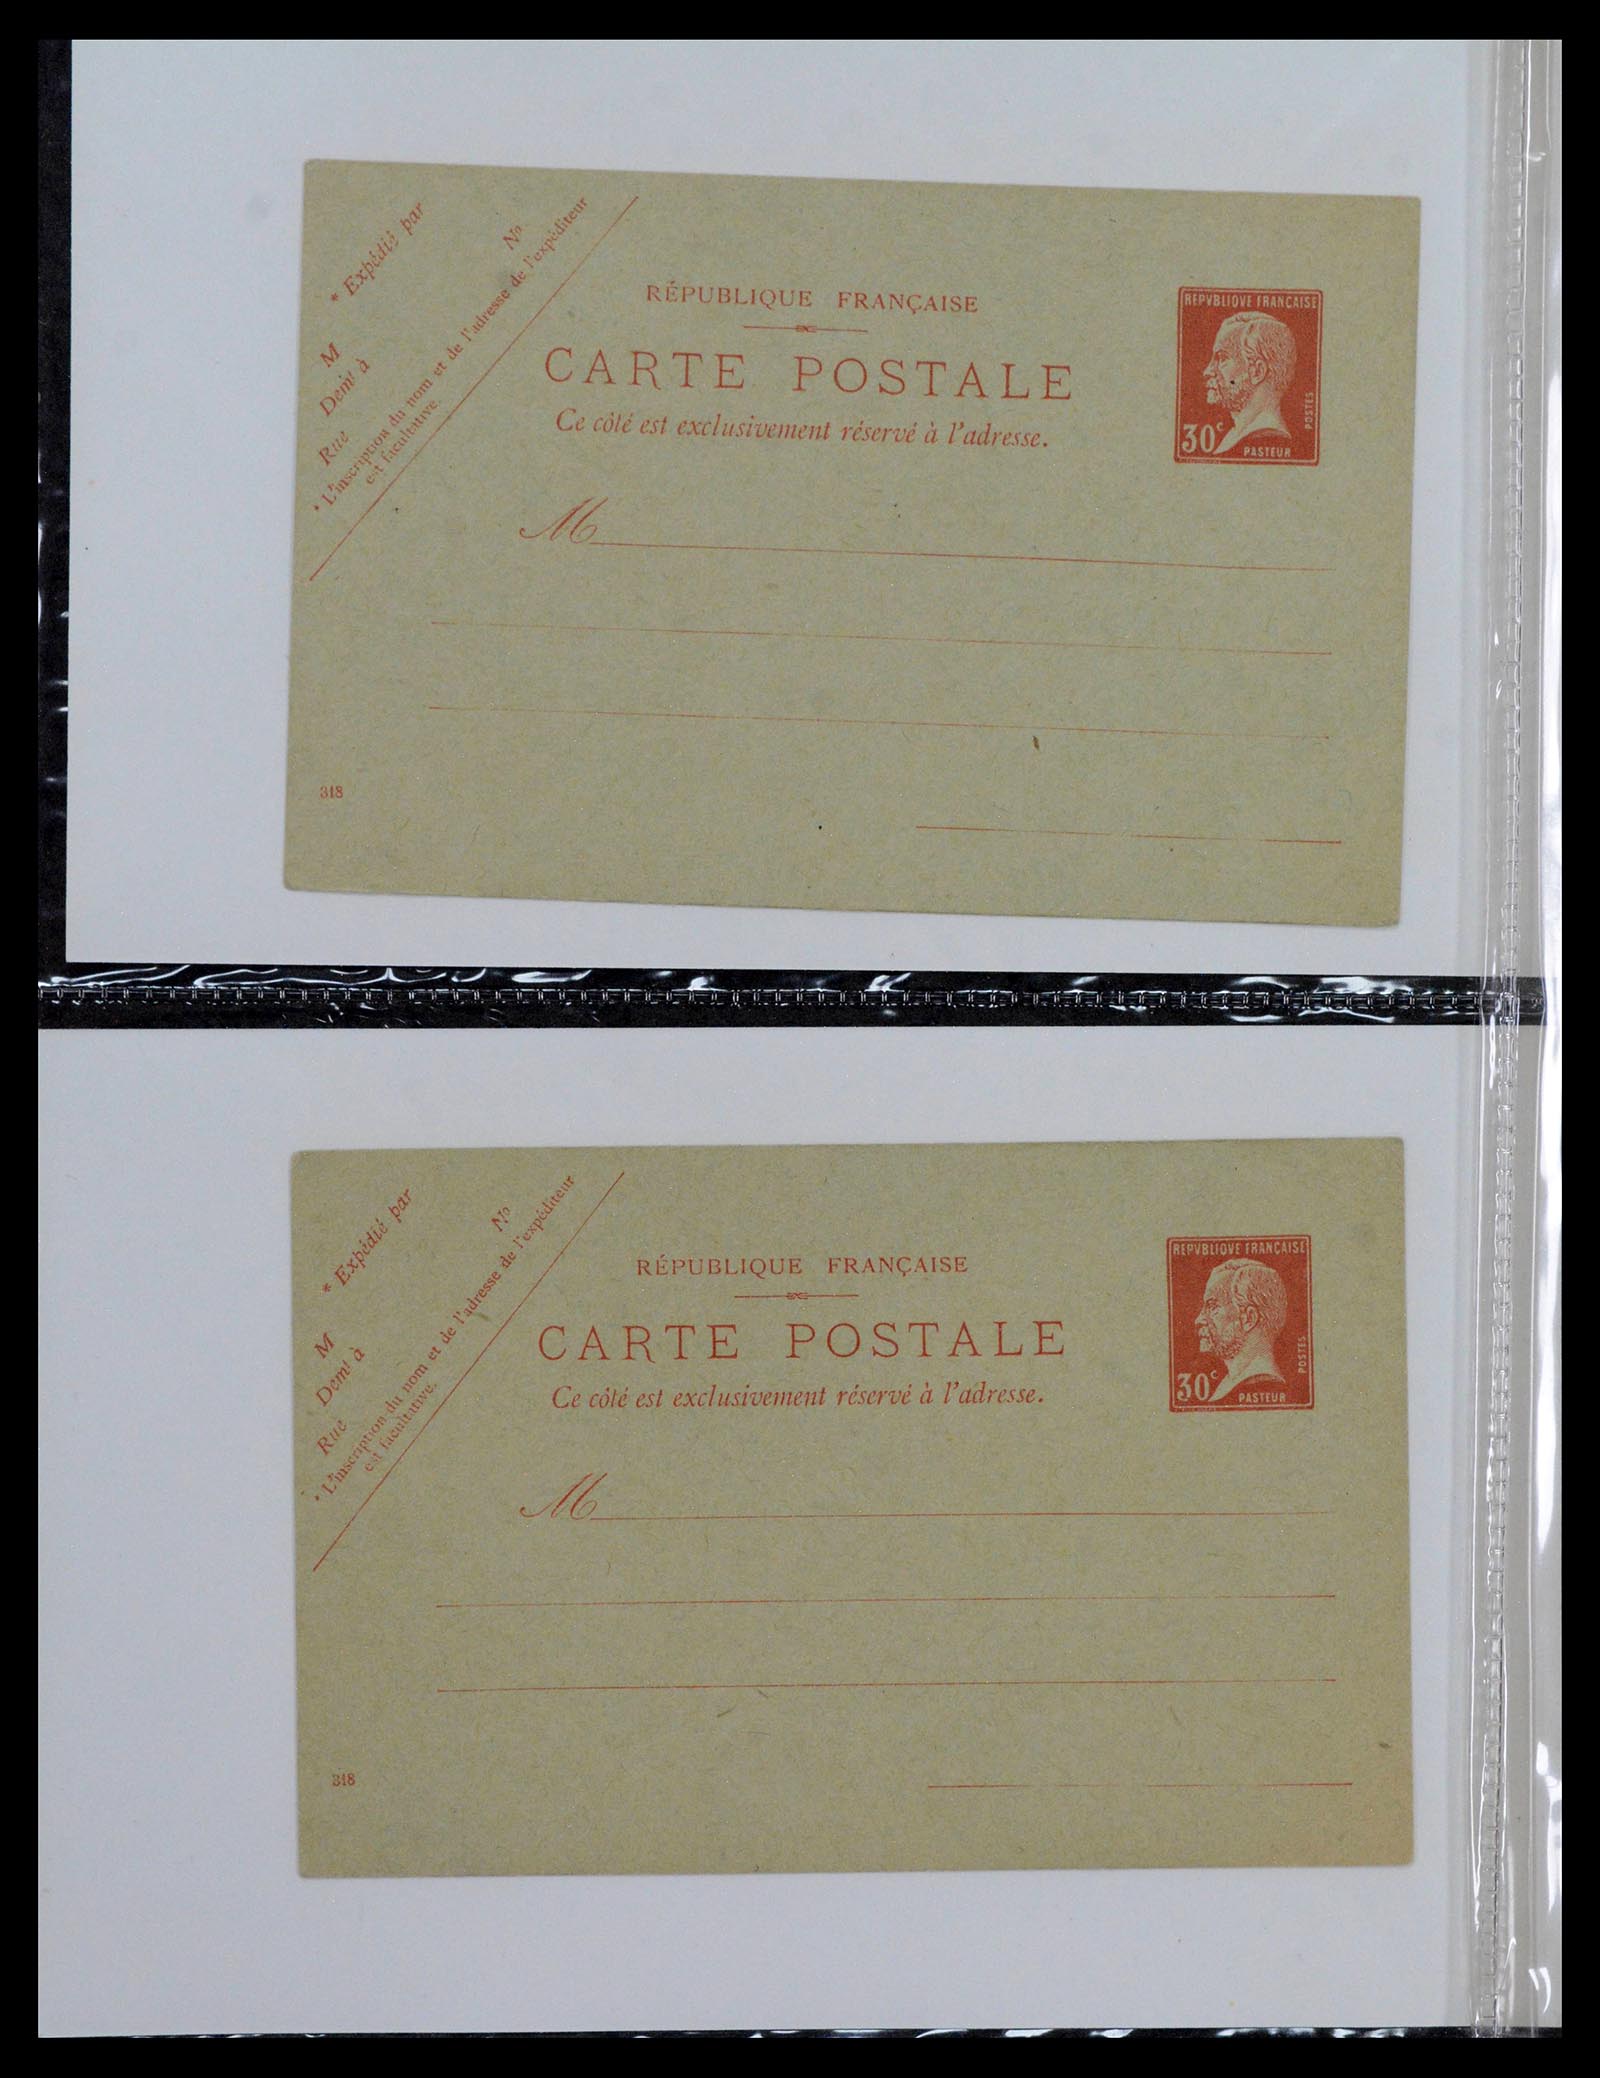 39122 0034 - Stamp collection 39122 France covers 1870-1960.